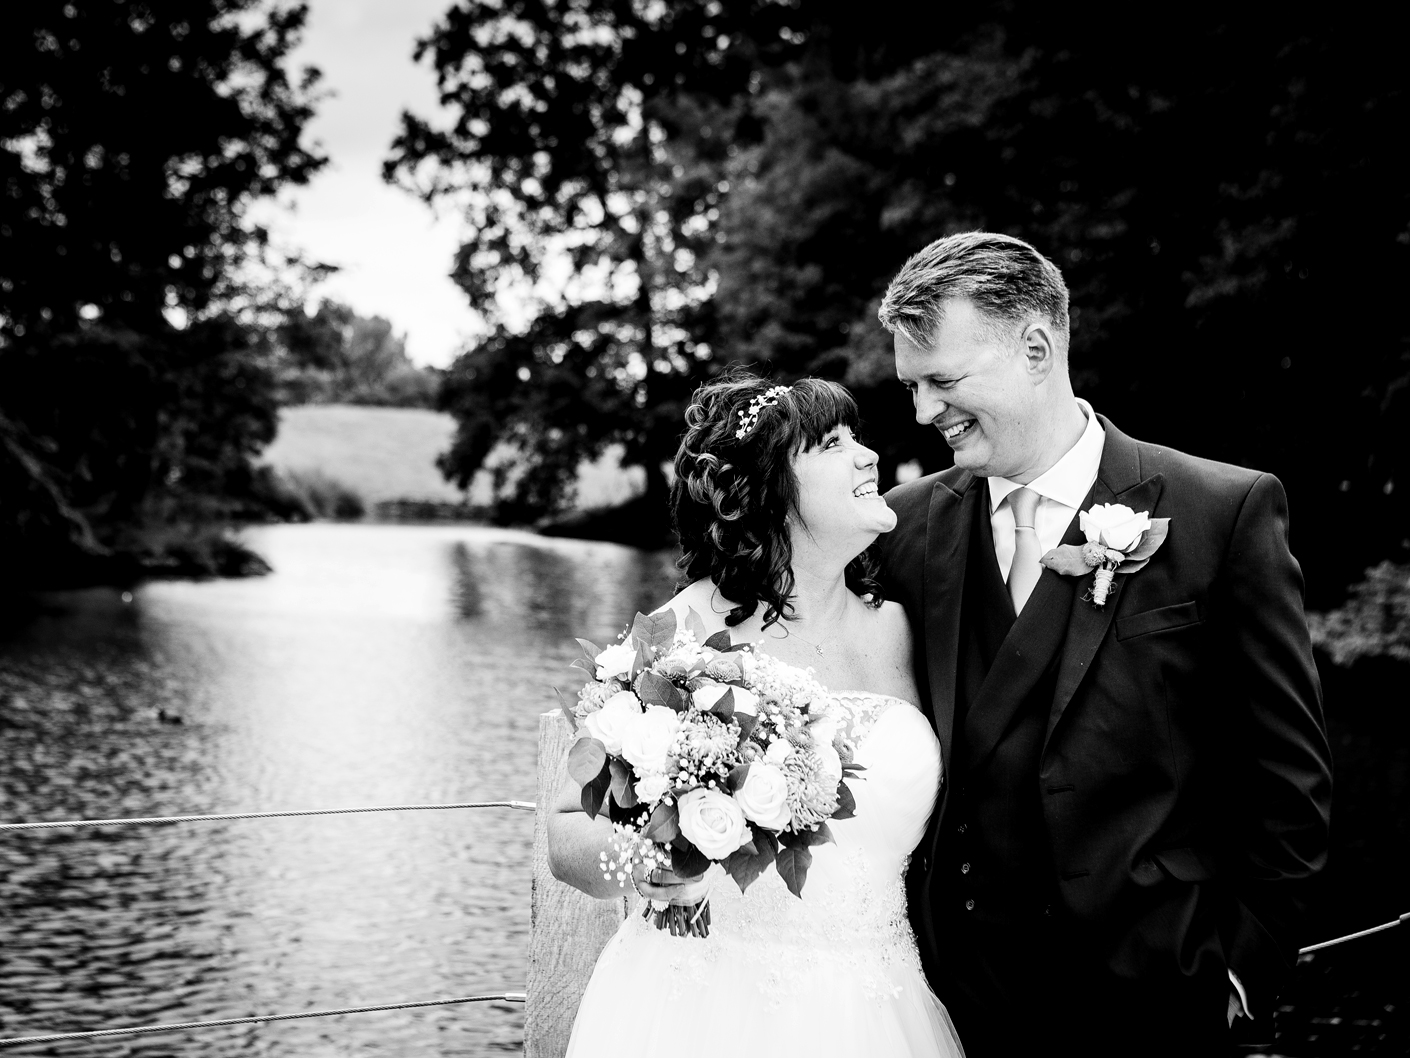 photography-of-the-bride-and-groom-in-the-grounds-of-merrydale-manor-near-knutsford-cheshire